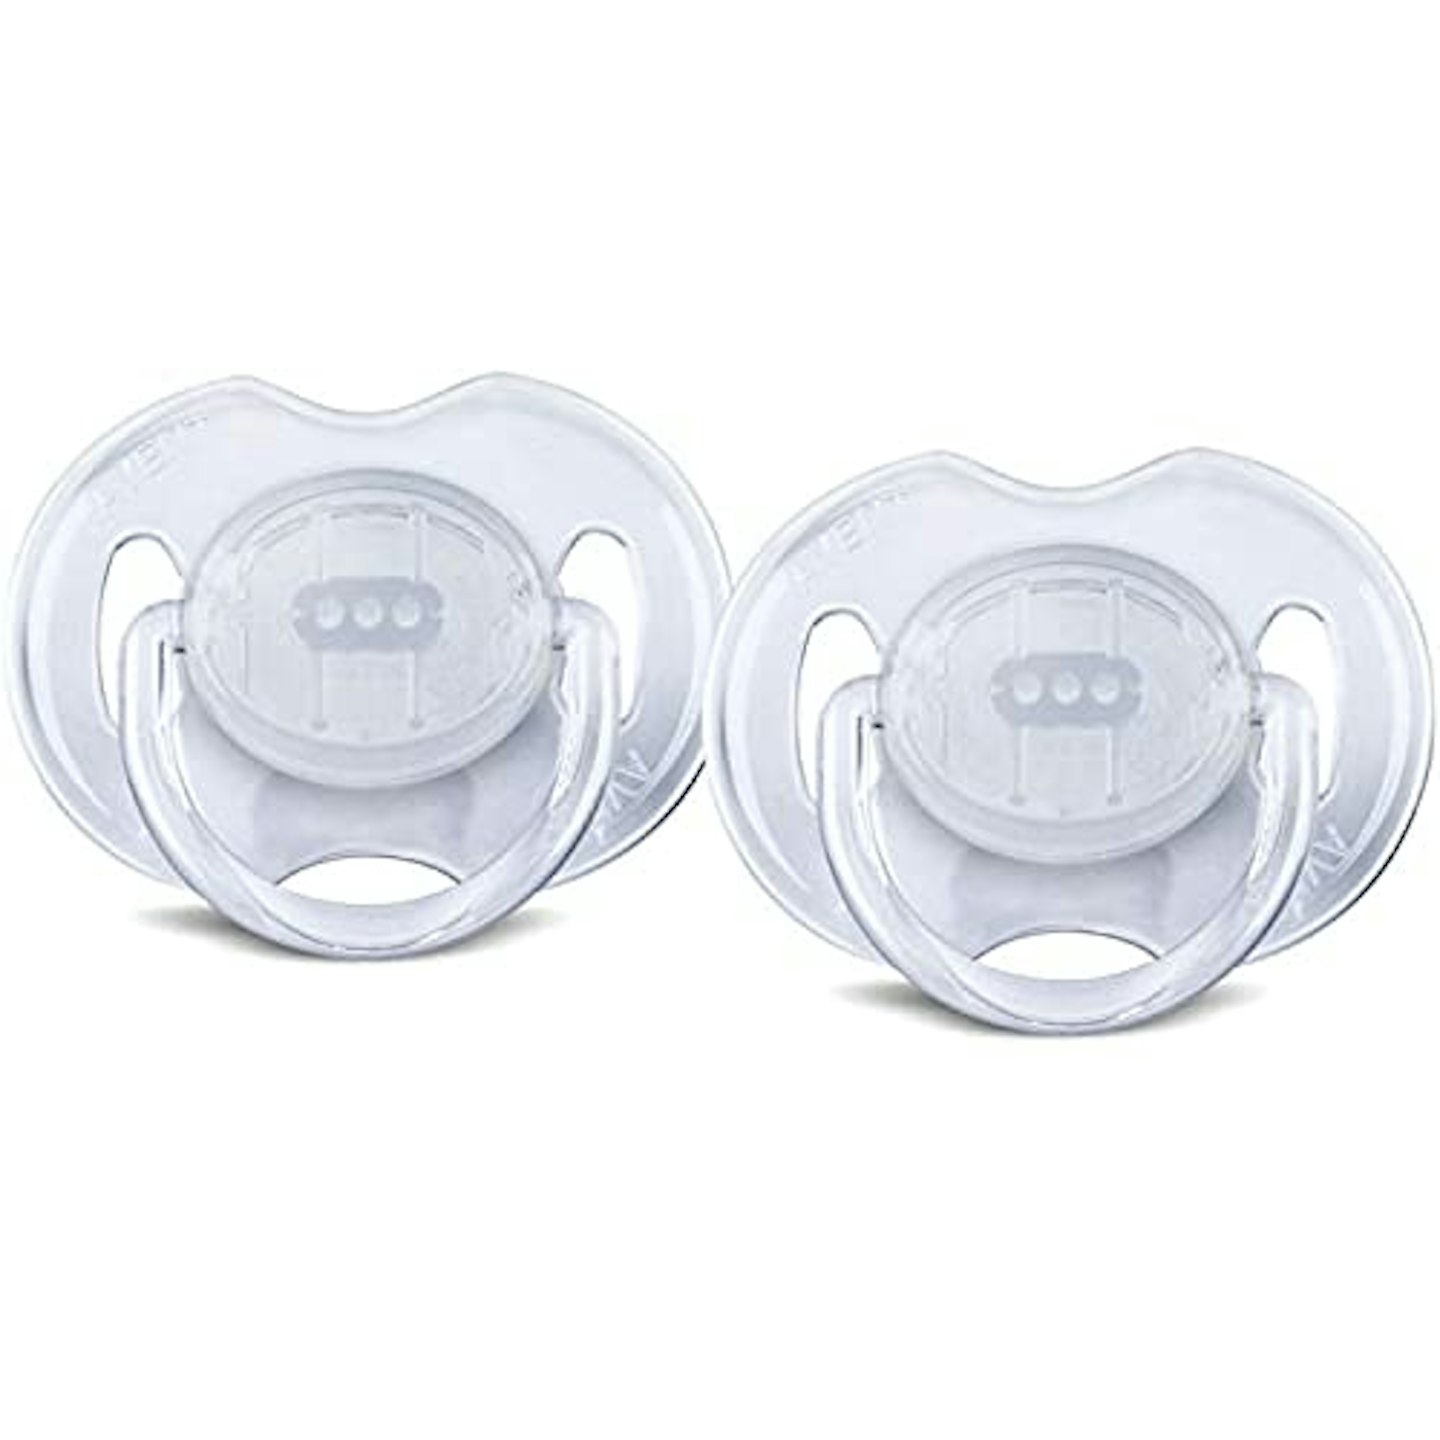 Philips Avent Classic Soother 0-6 Months, Pack of 2 